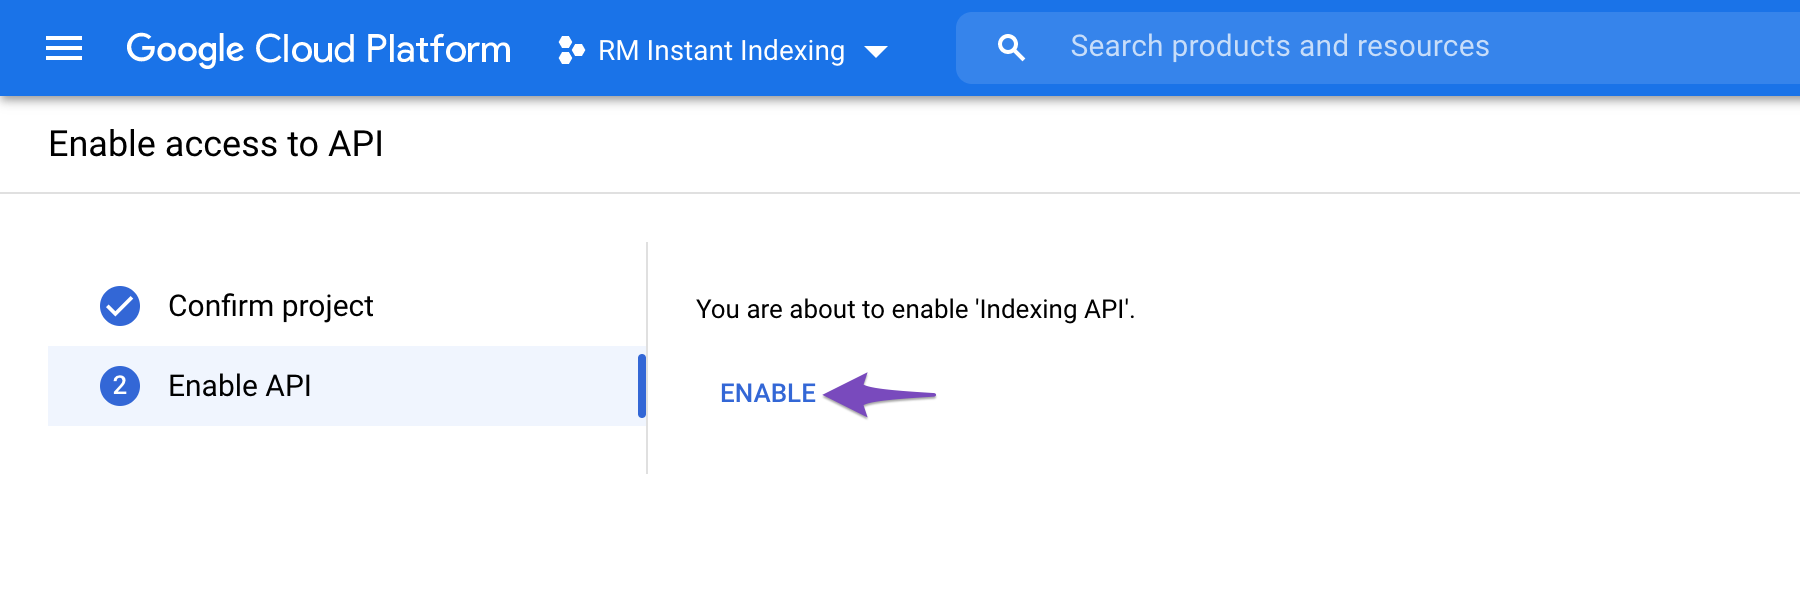 Enable the Instant Indexing API